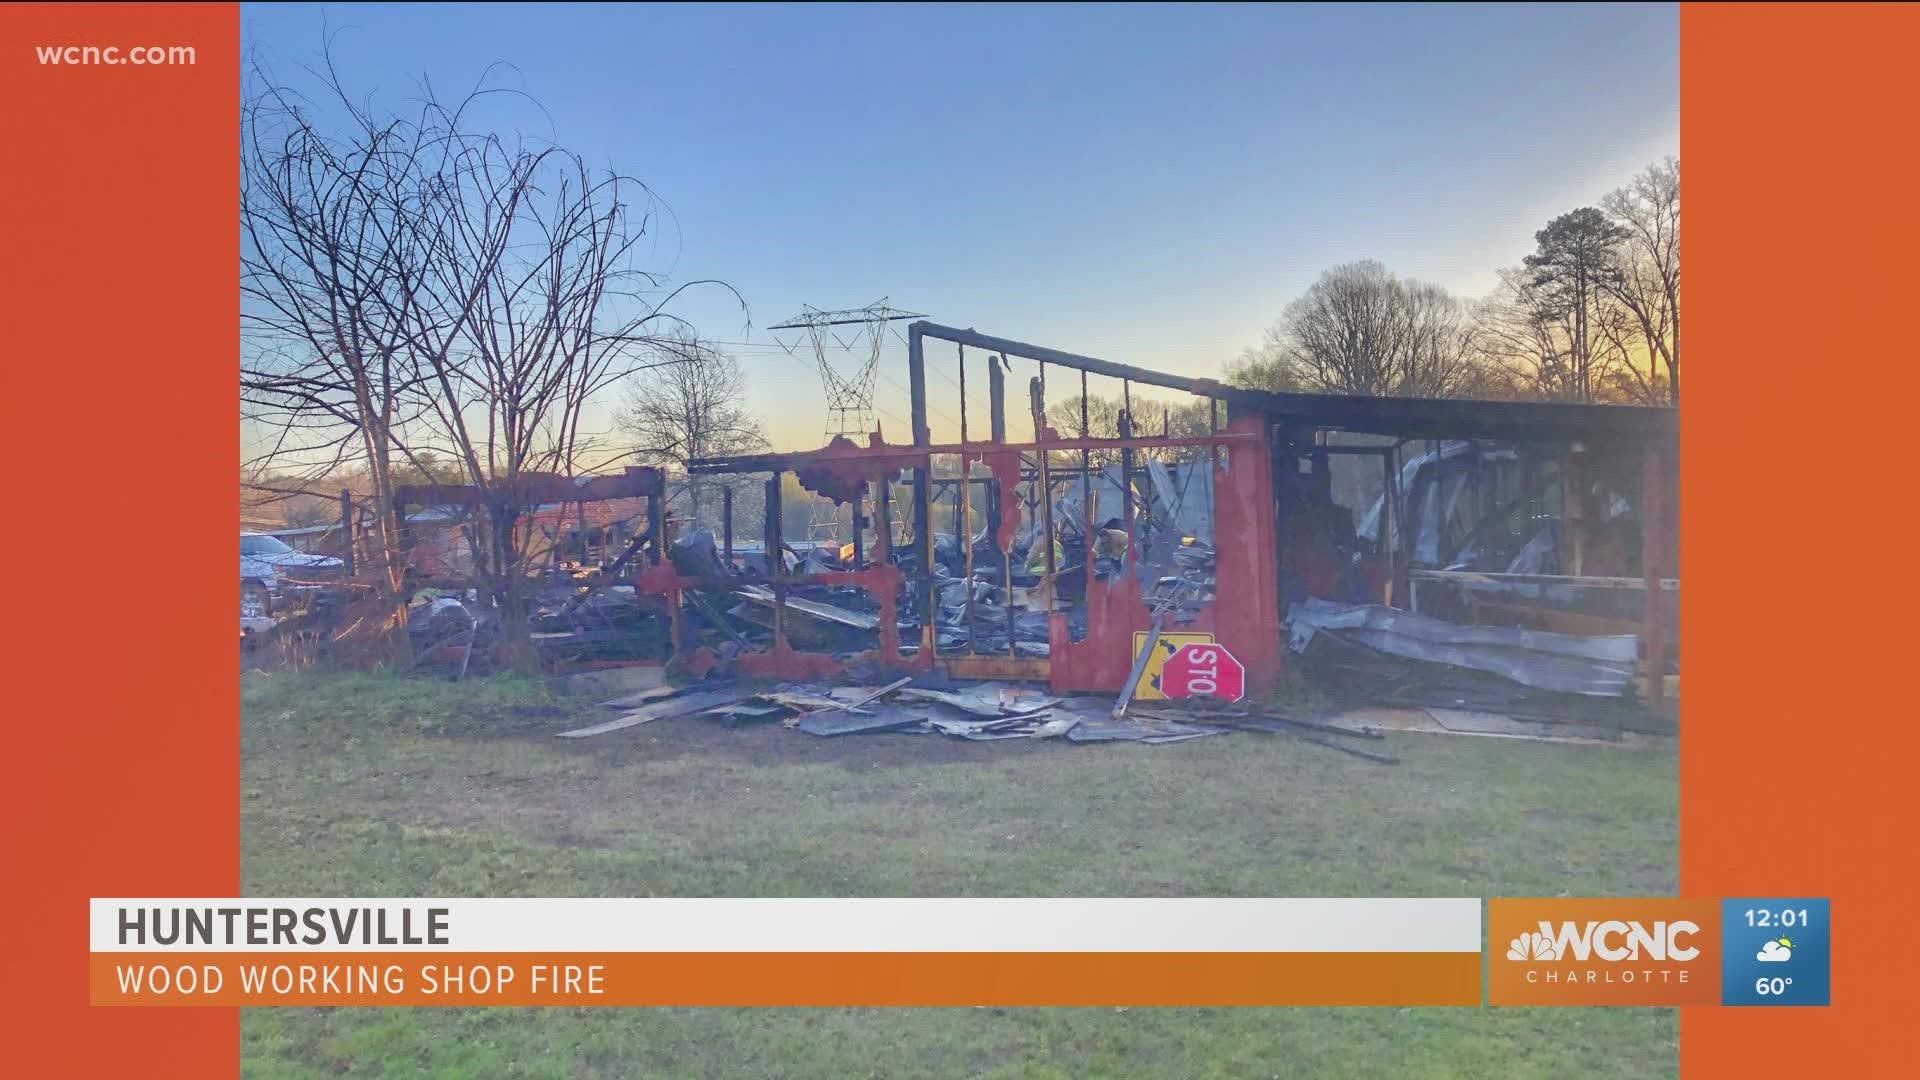 Huntersville firefighters said the building was engulfed in flames by the time they reached the scene. The building was ruled a total loss after the fire burned out.